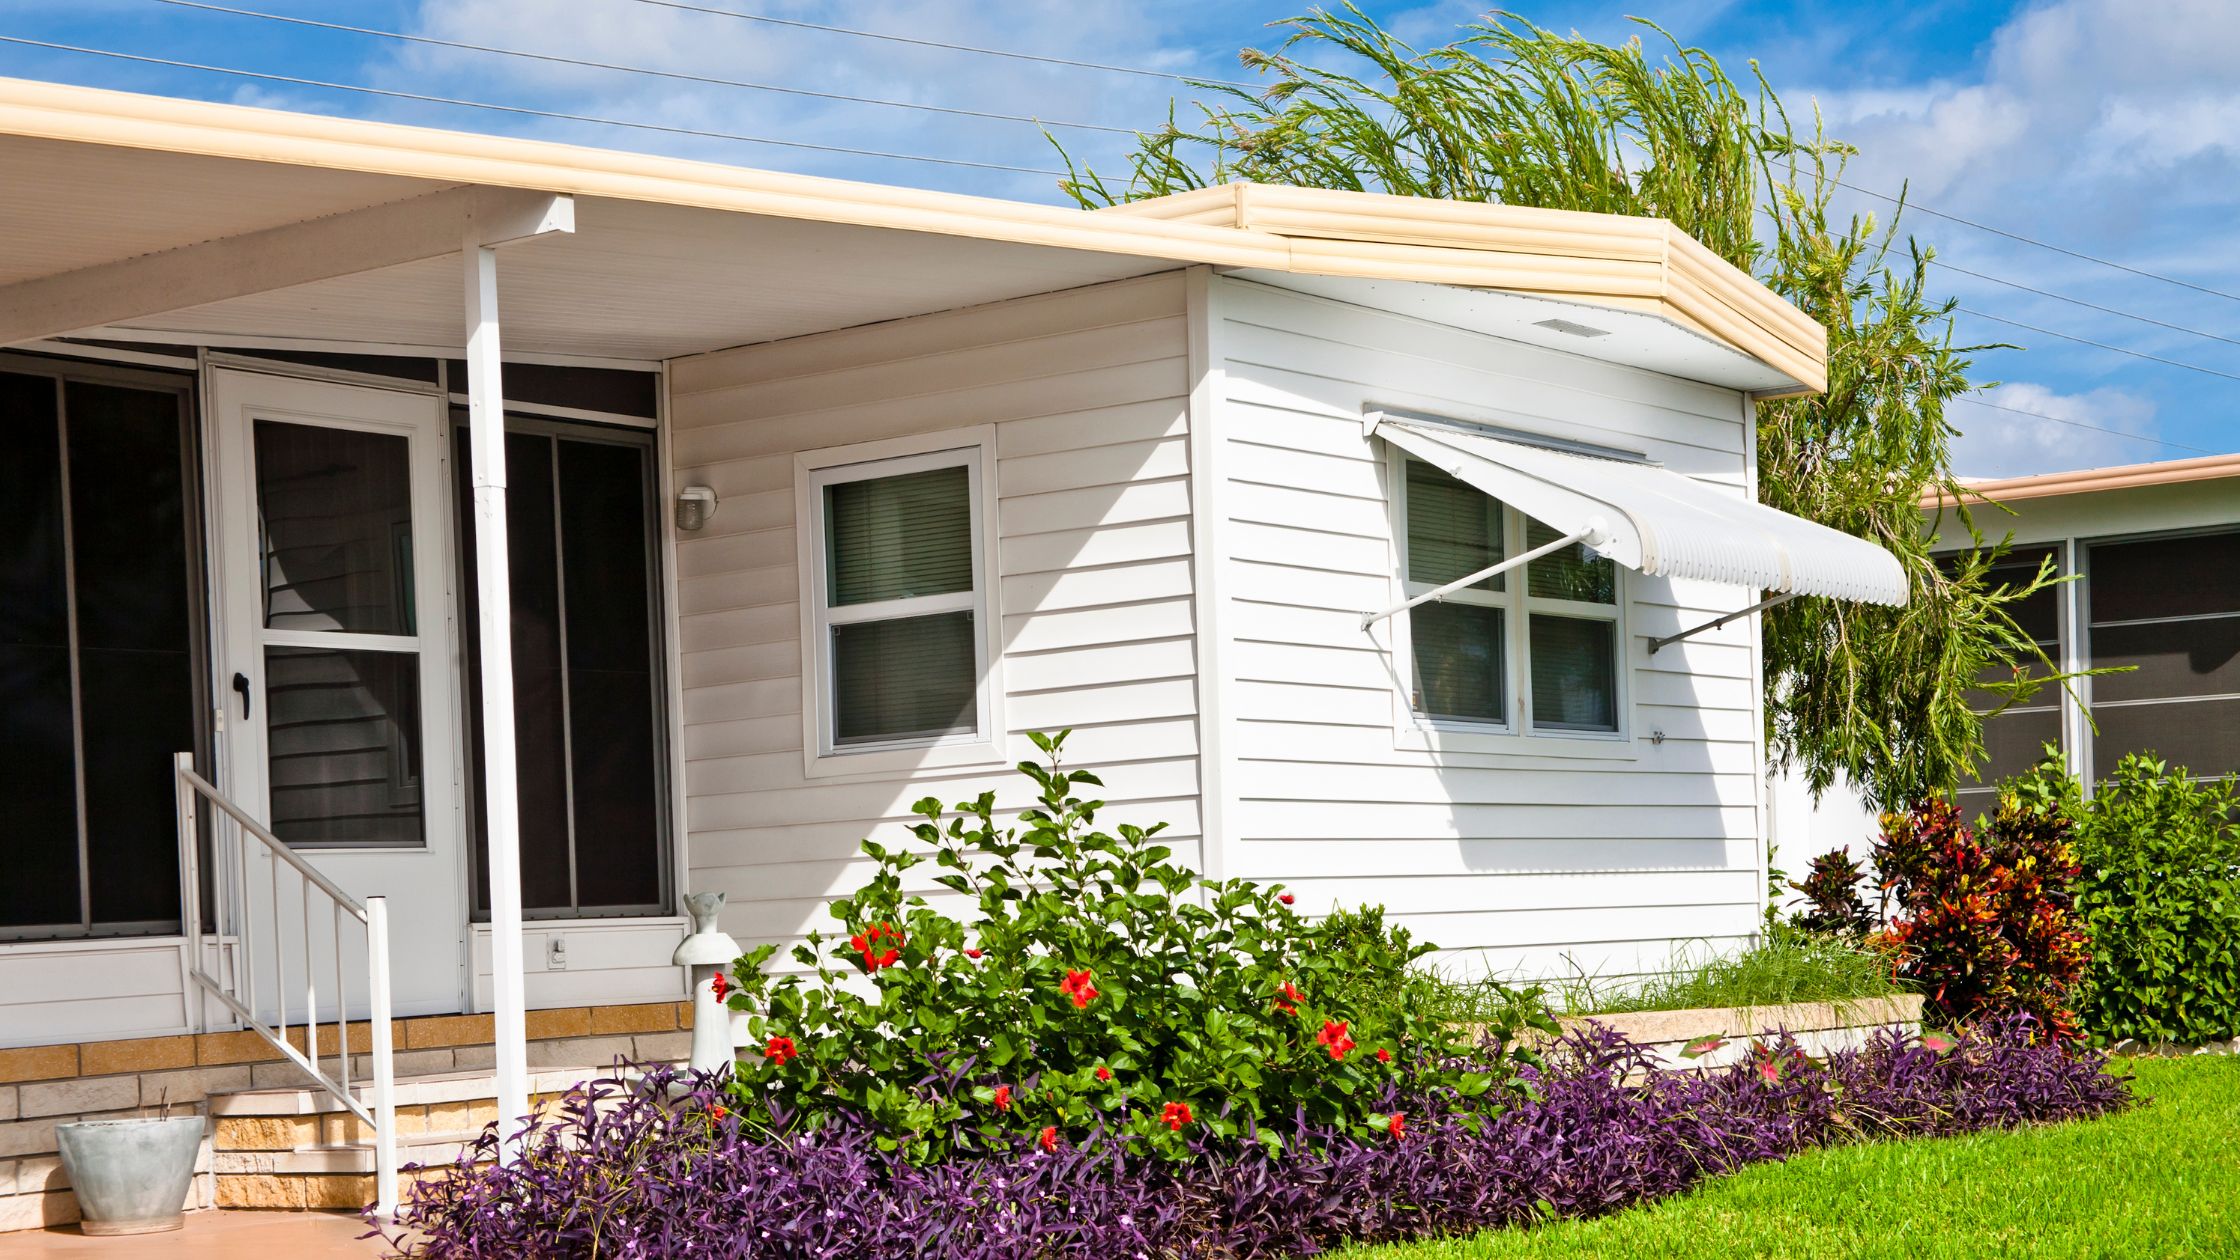 Reduce Risks With Insurance Coverage Specifically For Your Mobile Home